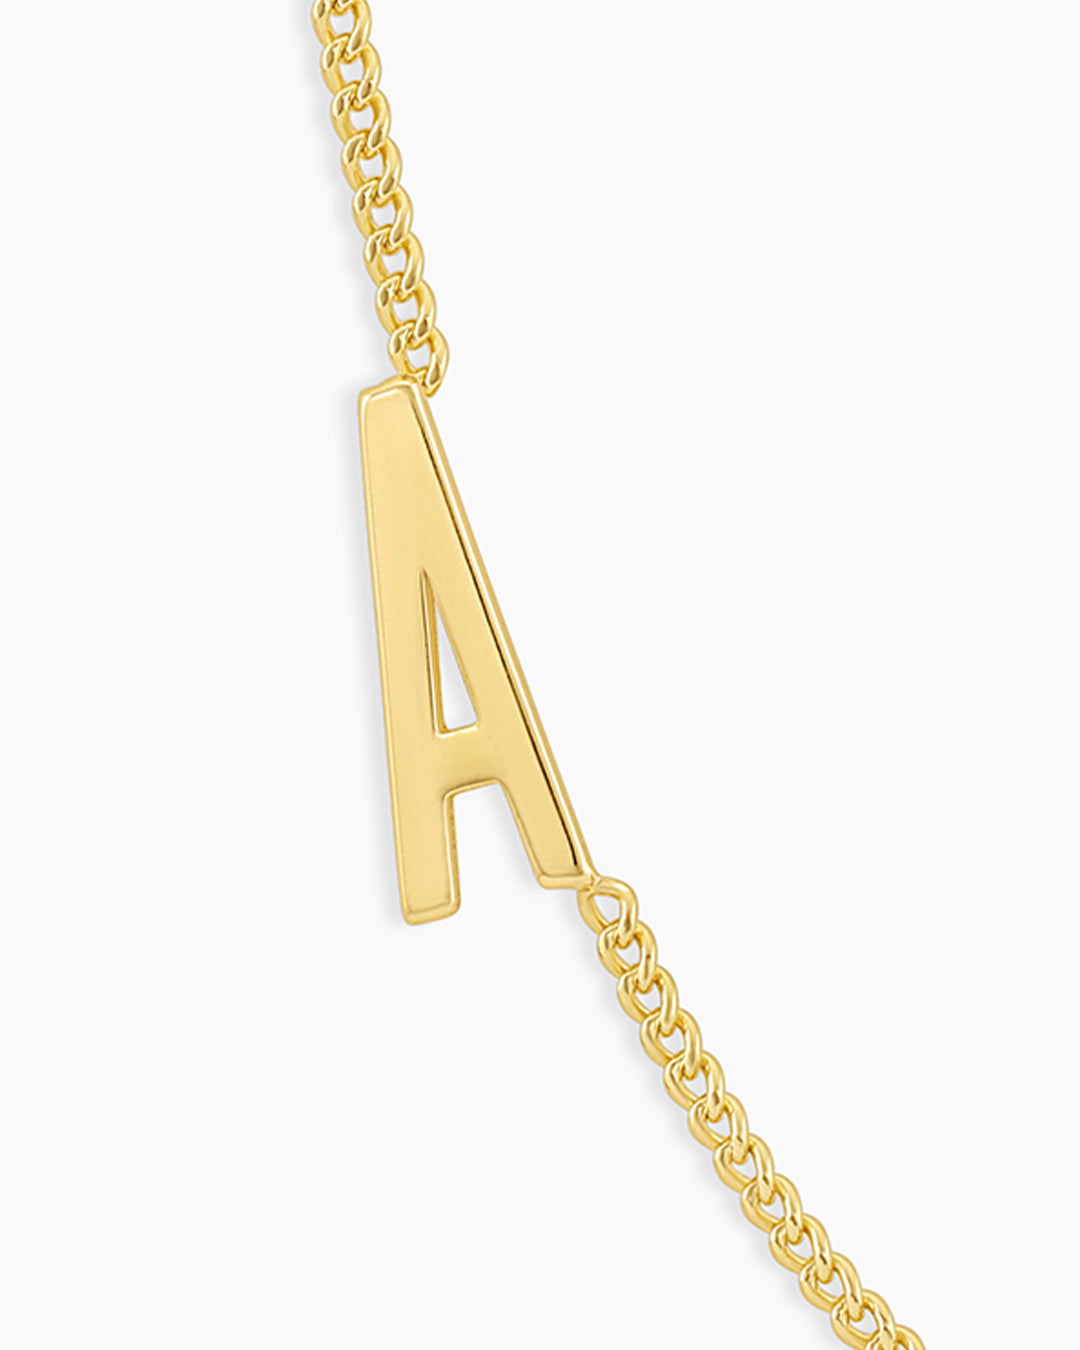 14k Yellow Gold-Filled Letter M Charm Pendant Necklace, 18